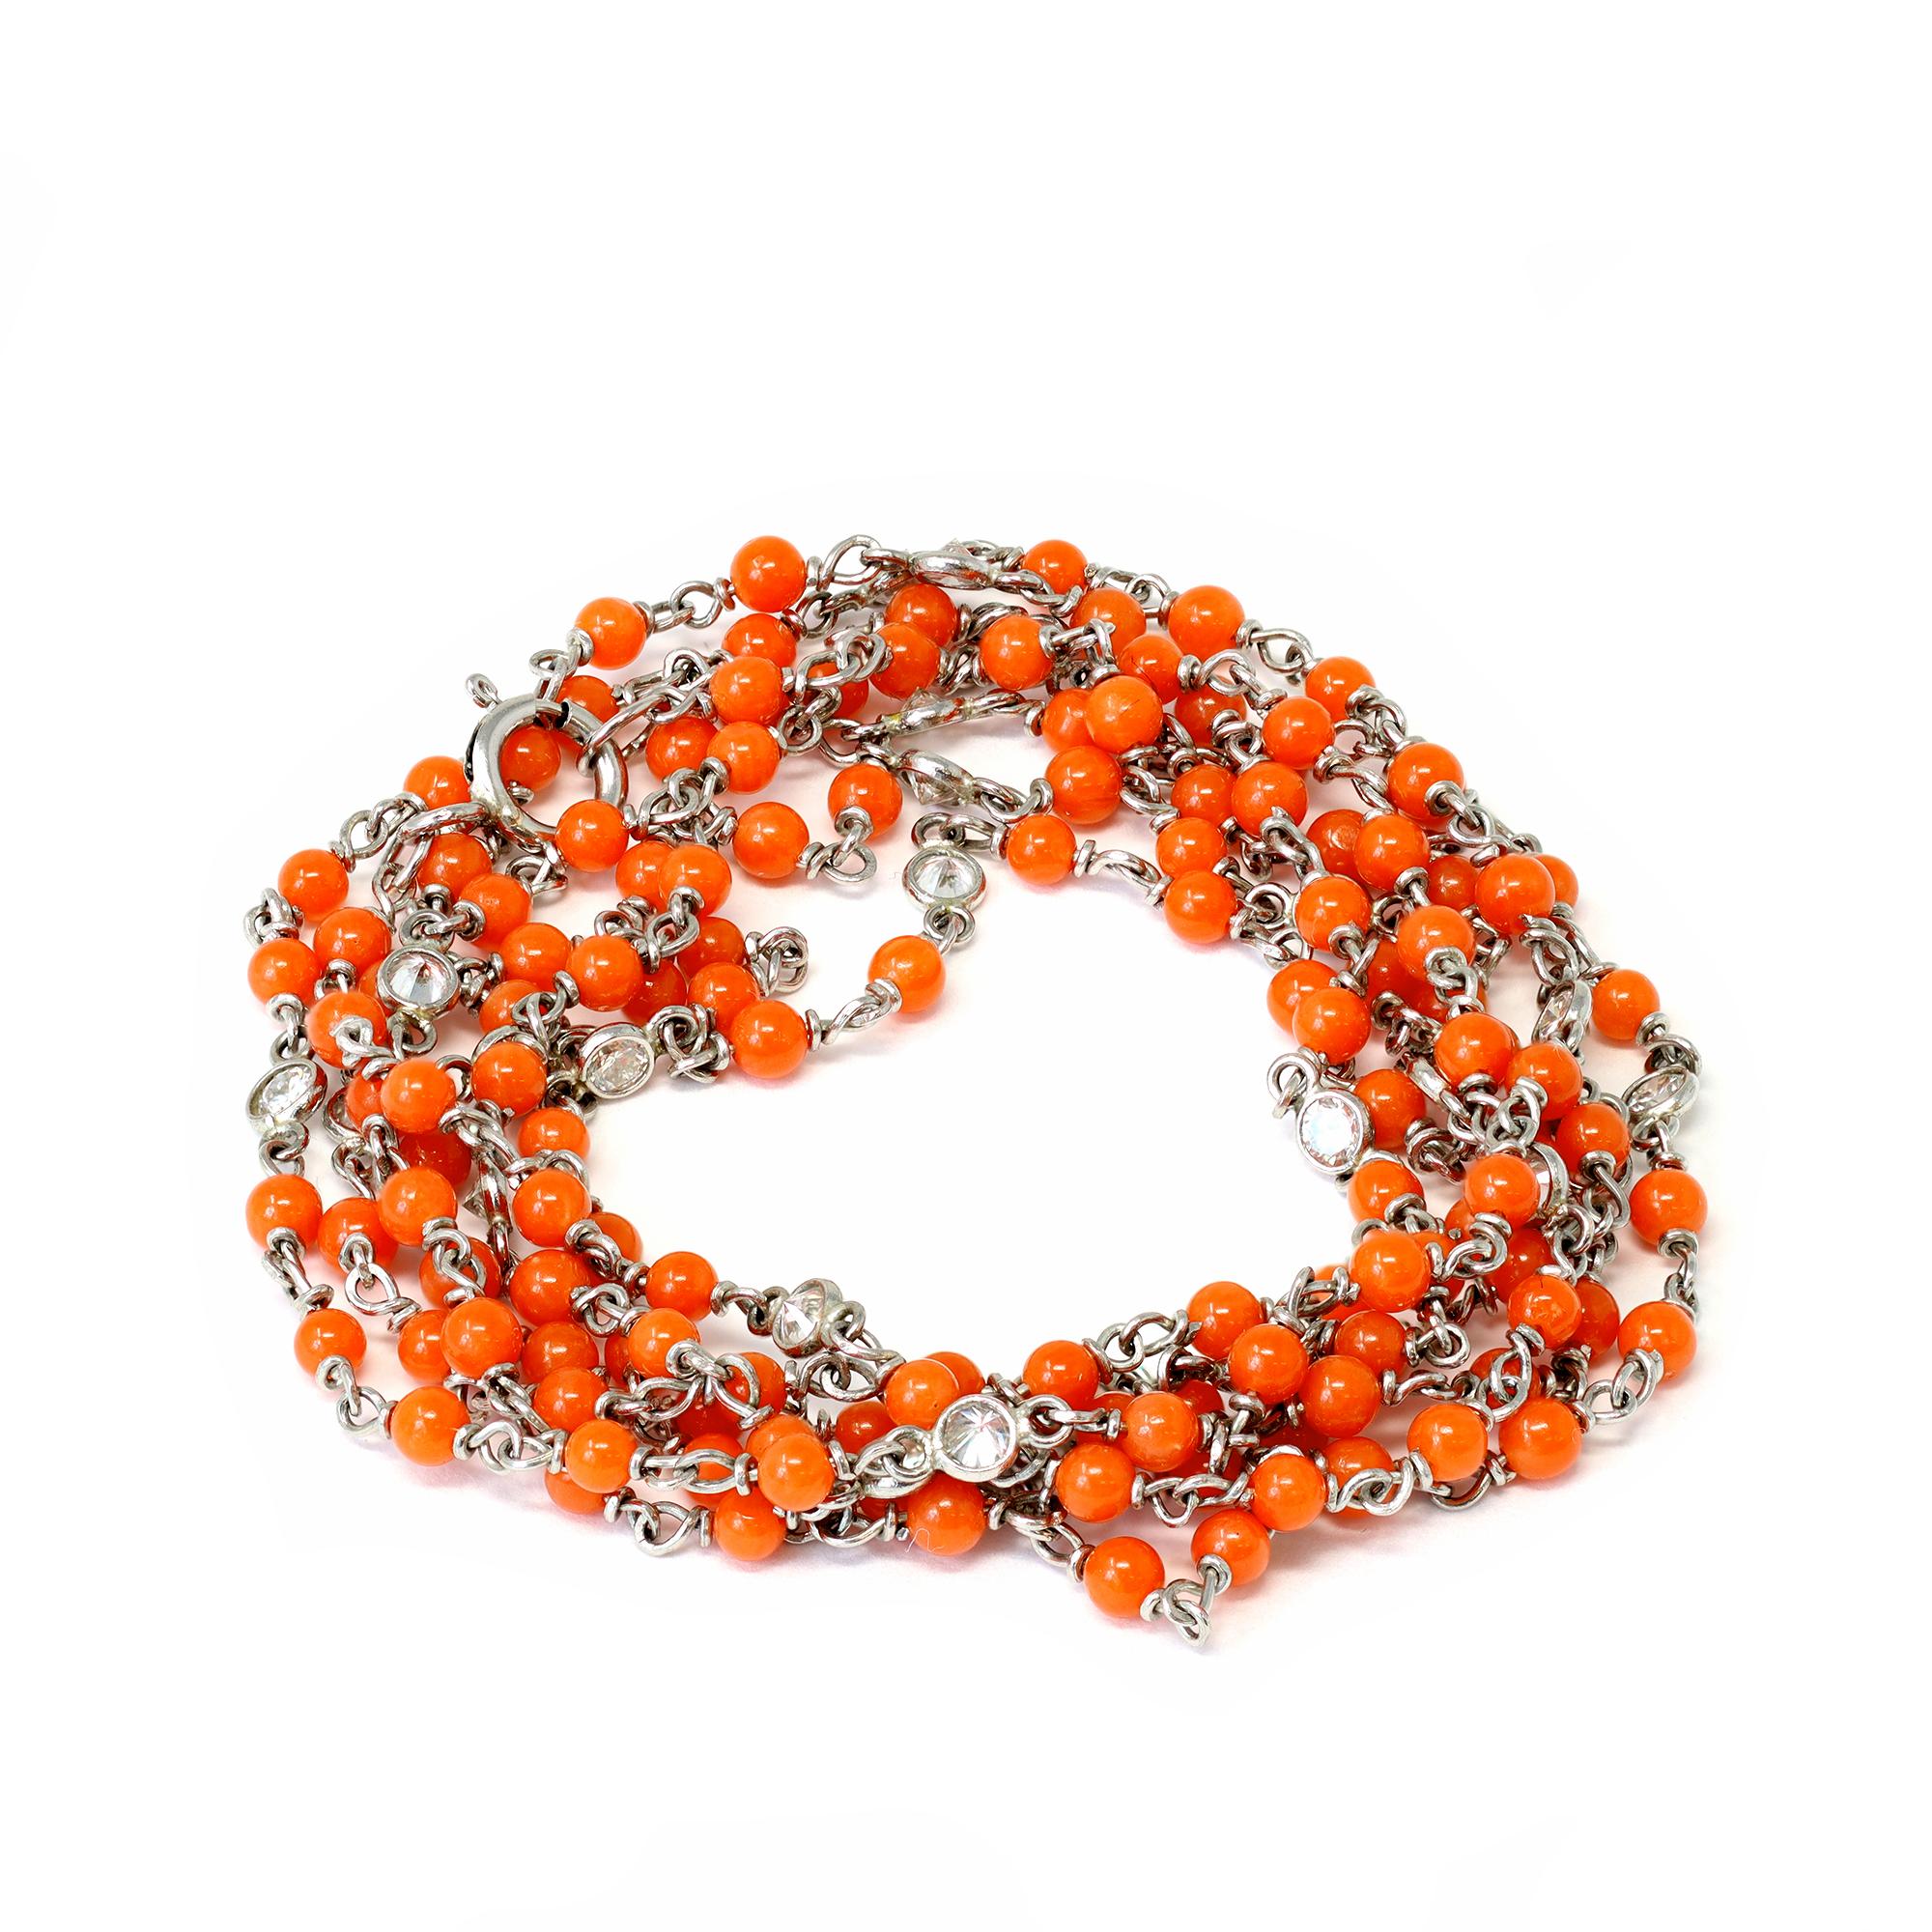 A dainty handmade opera necklace designed by Rosaria Varra, featuring natural sardinian coral beads alternating with bezel set round diamonds. The necklace is created in platinum and has an estimated diamond weight of 0.87 carats, G color, VS-SI